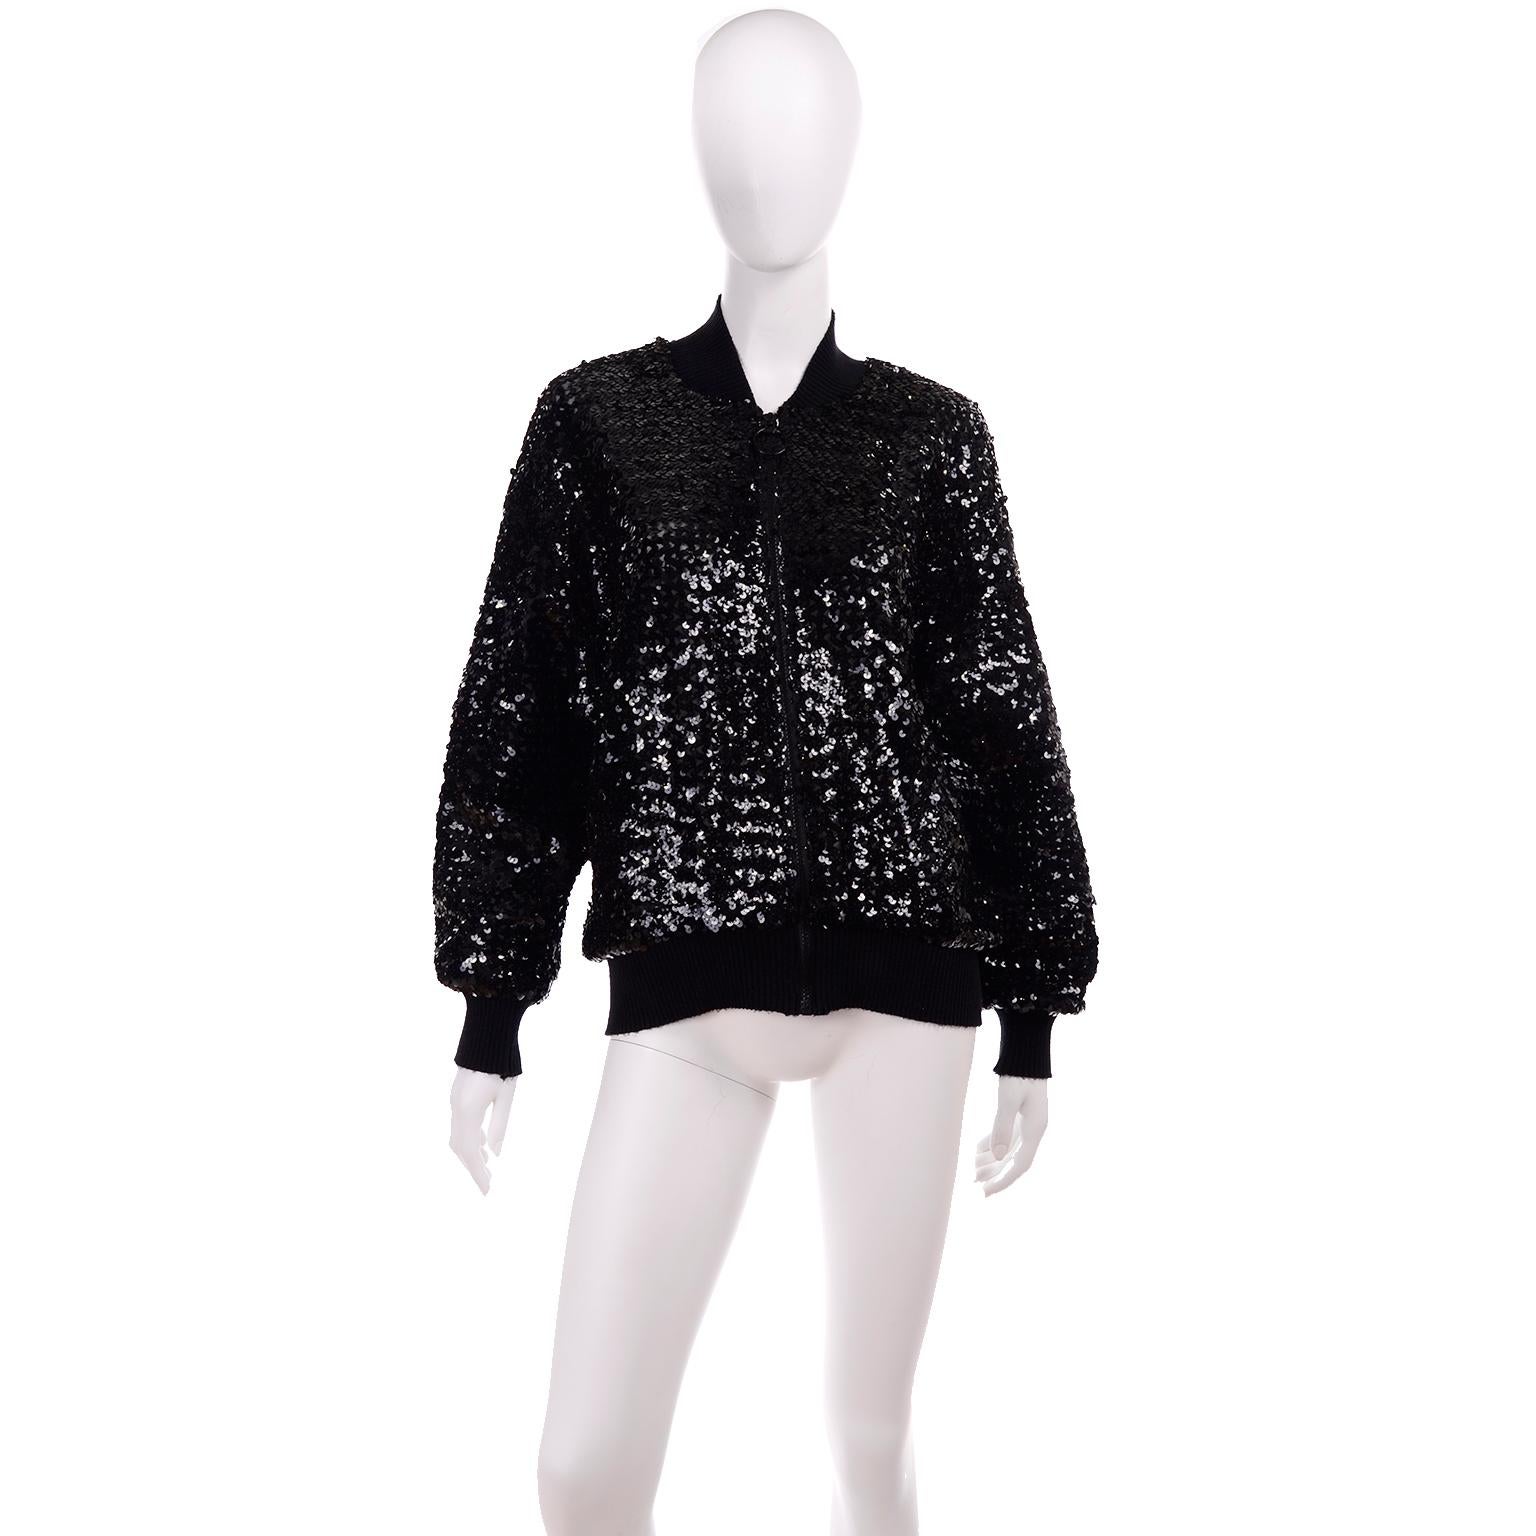 This is such a great black sequin bomber jacket style zip front top that was made in U.S.A by  Caron Chicago in the 1980's. The front has a metal zipper with a metal ring and there are elastic knit cuffs and an elastic knit waistband. The jacket has